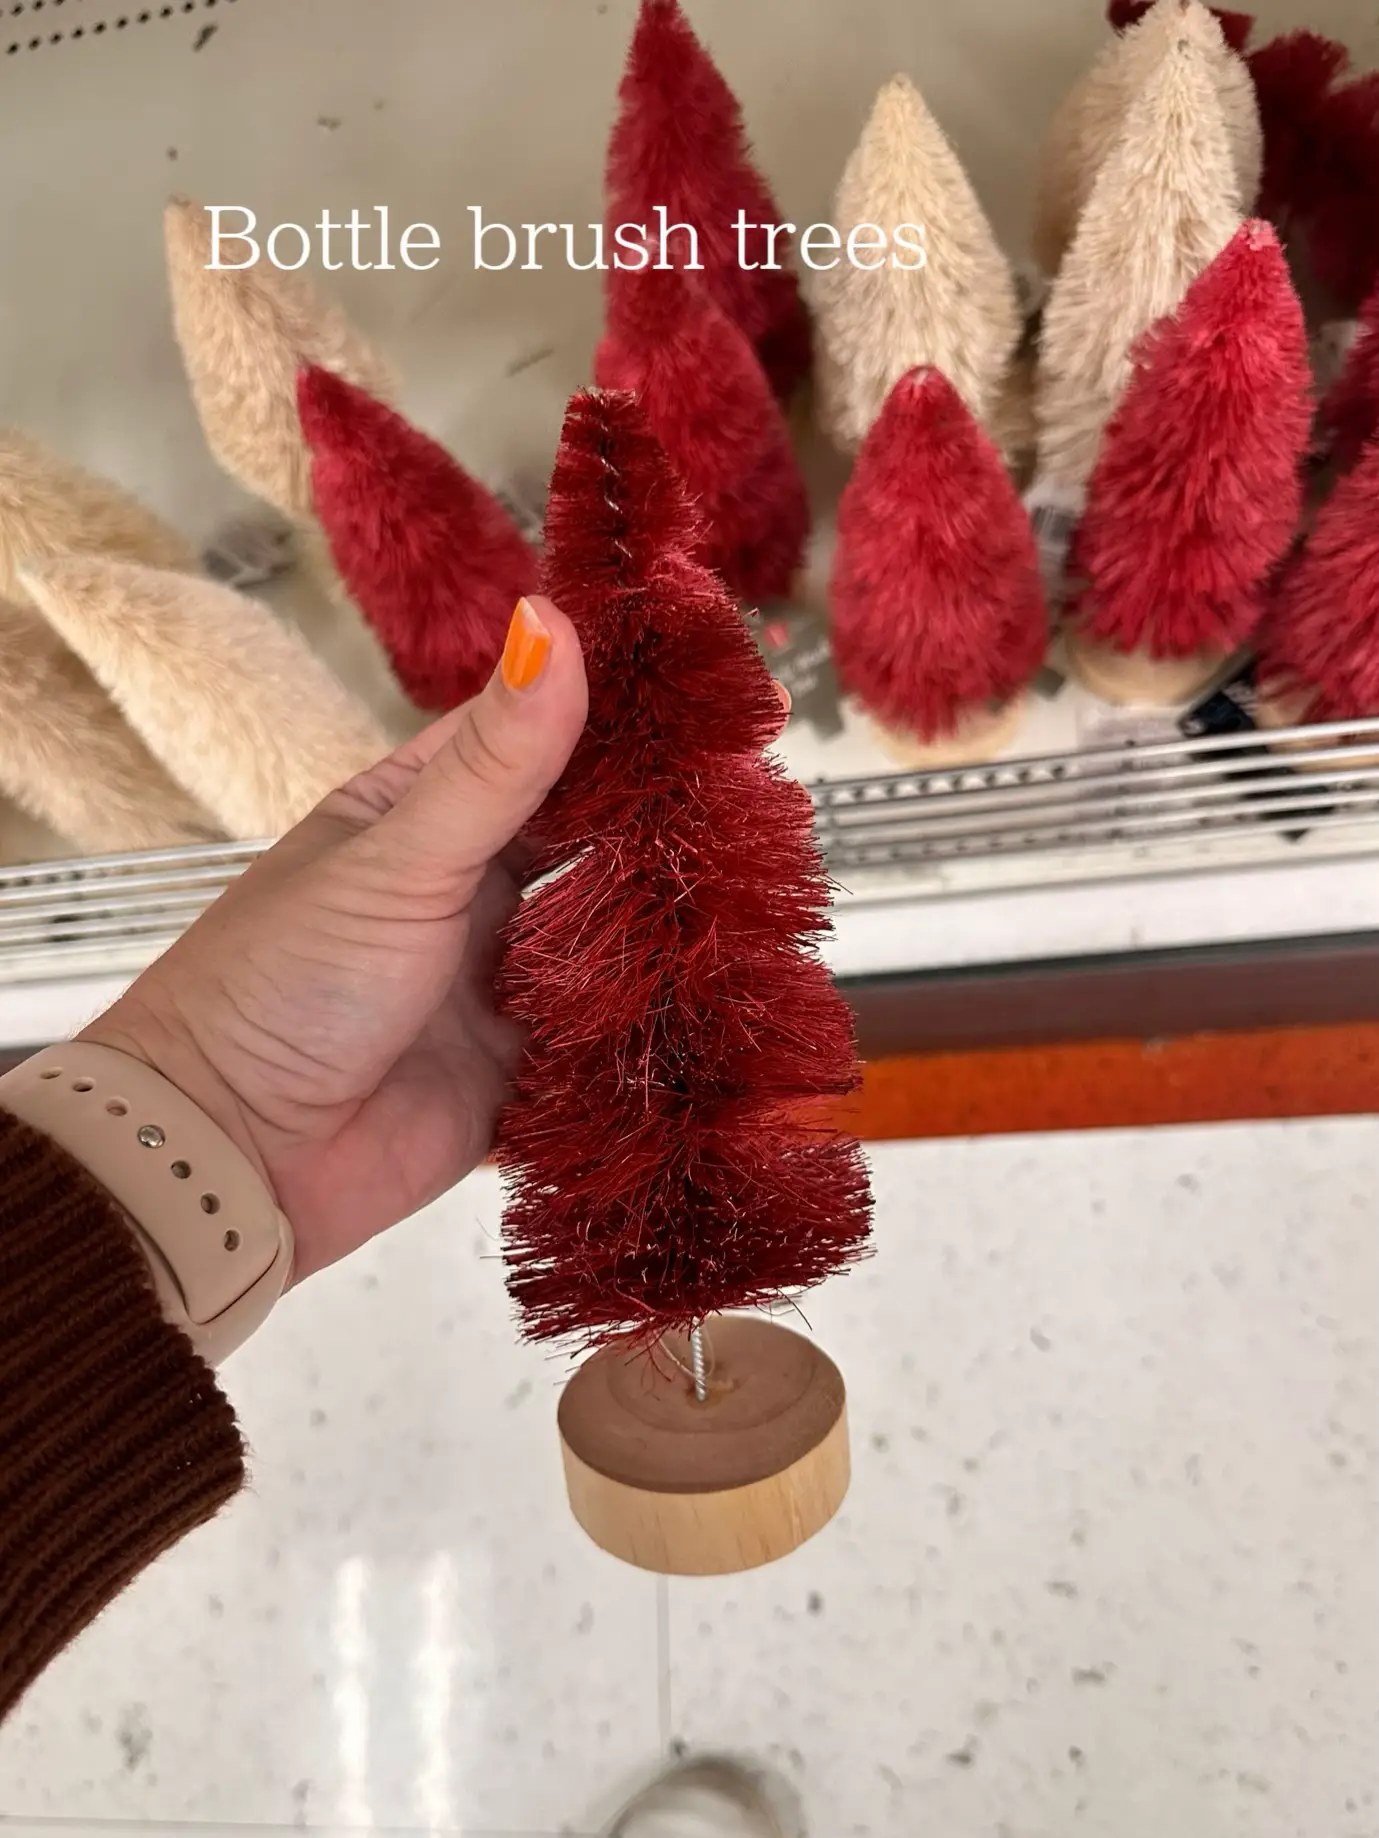  A person is holding a bottle brush tree in their hand.